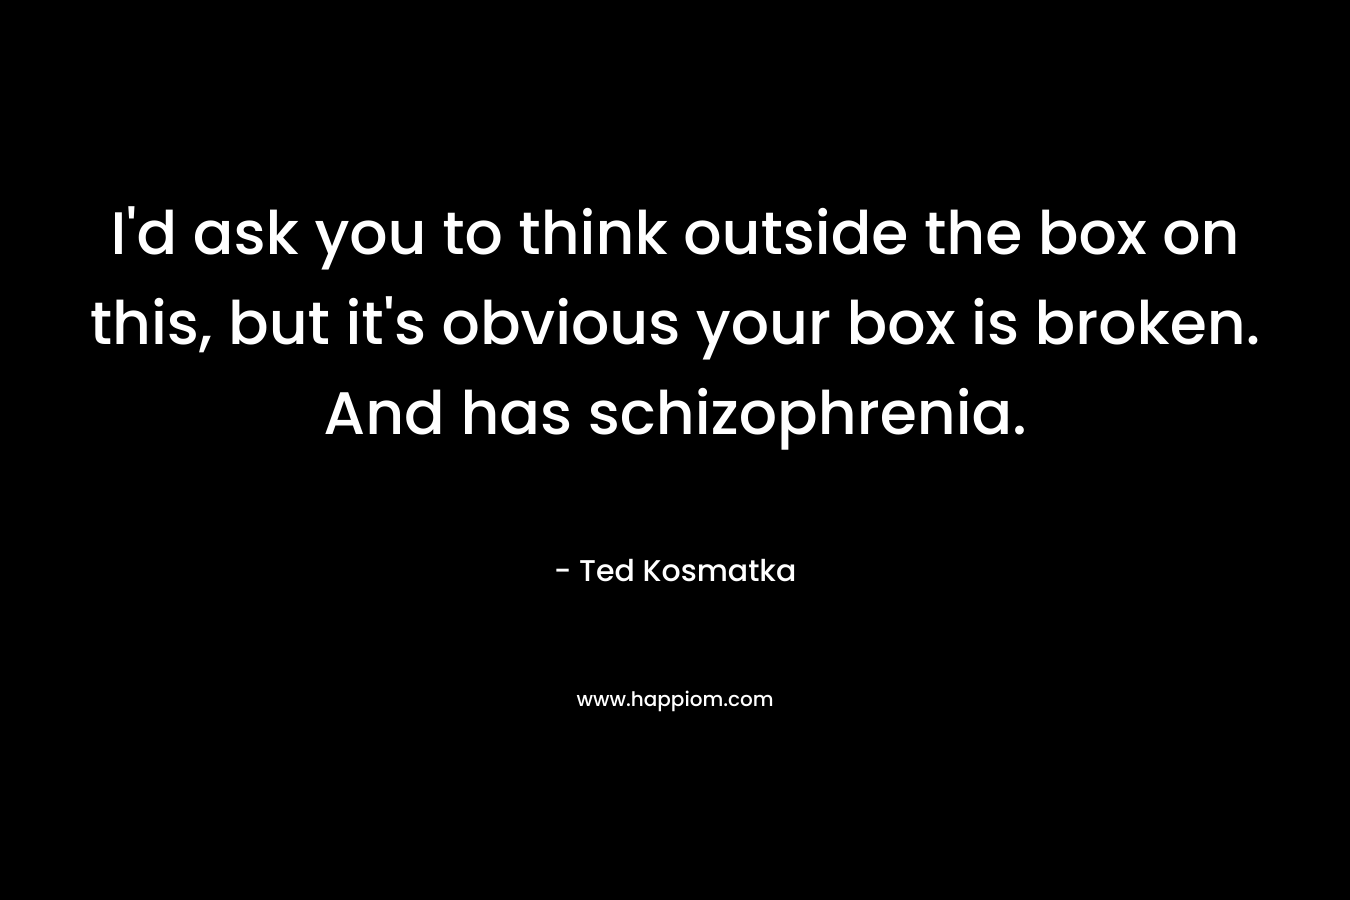 I’d ask you to think outside the box on this, but it’s obvious your box is broken. And has schizophrenia. – Ted Kosmatka